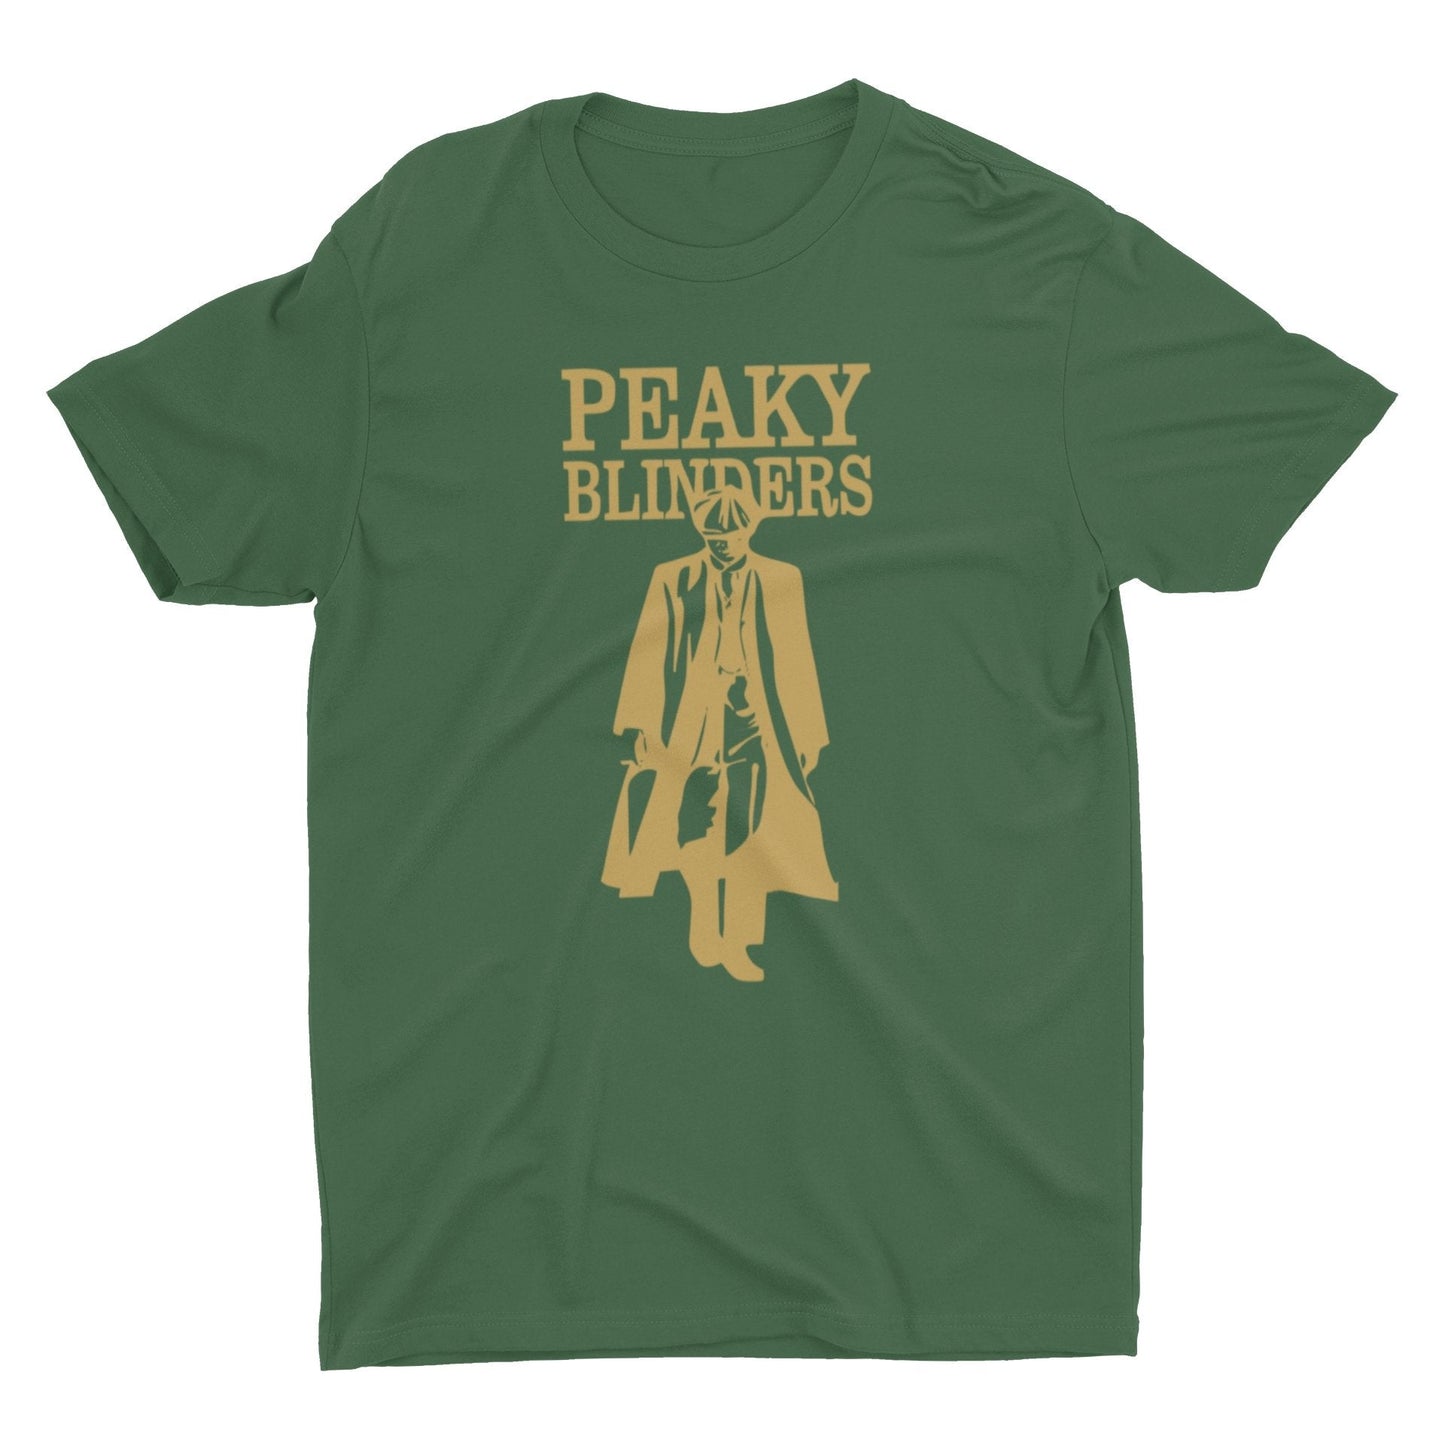 thelegalgang,Peaky Blinders  Graphic T shirt for Men,.